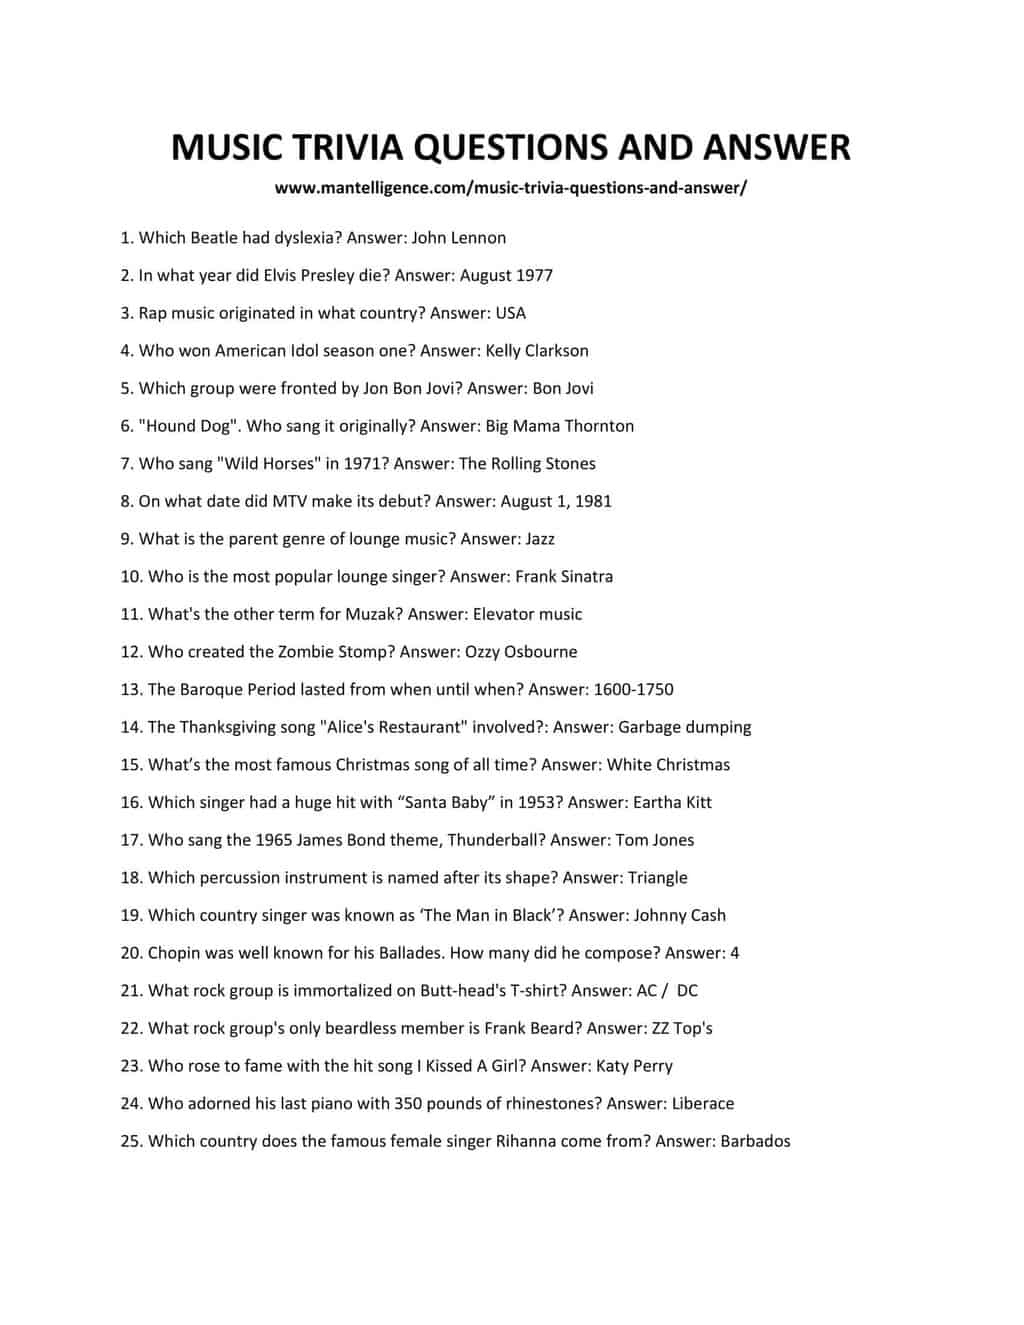 Music Trivia Questions And Answers Printable